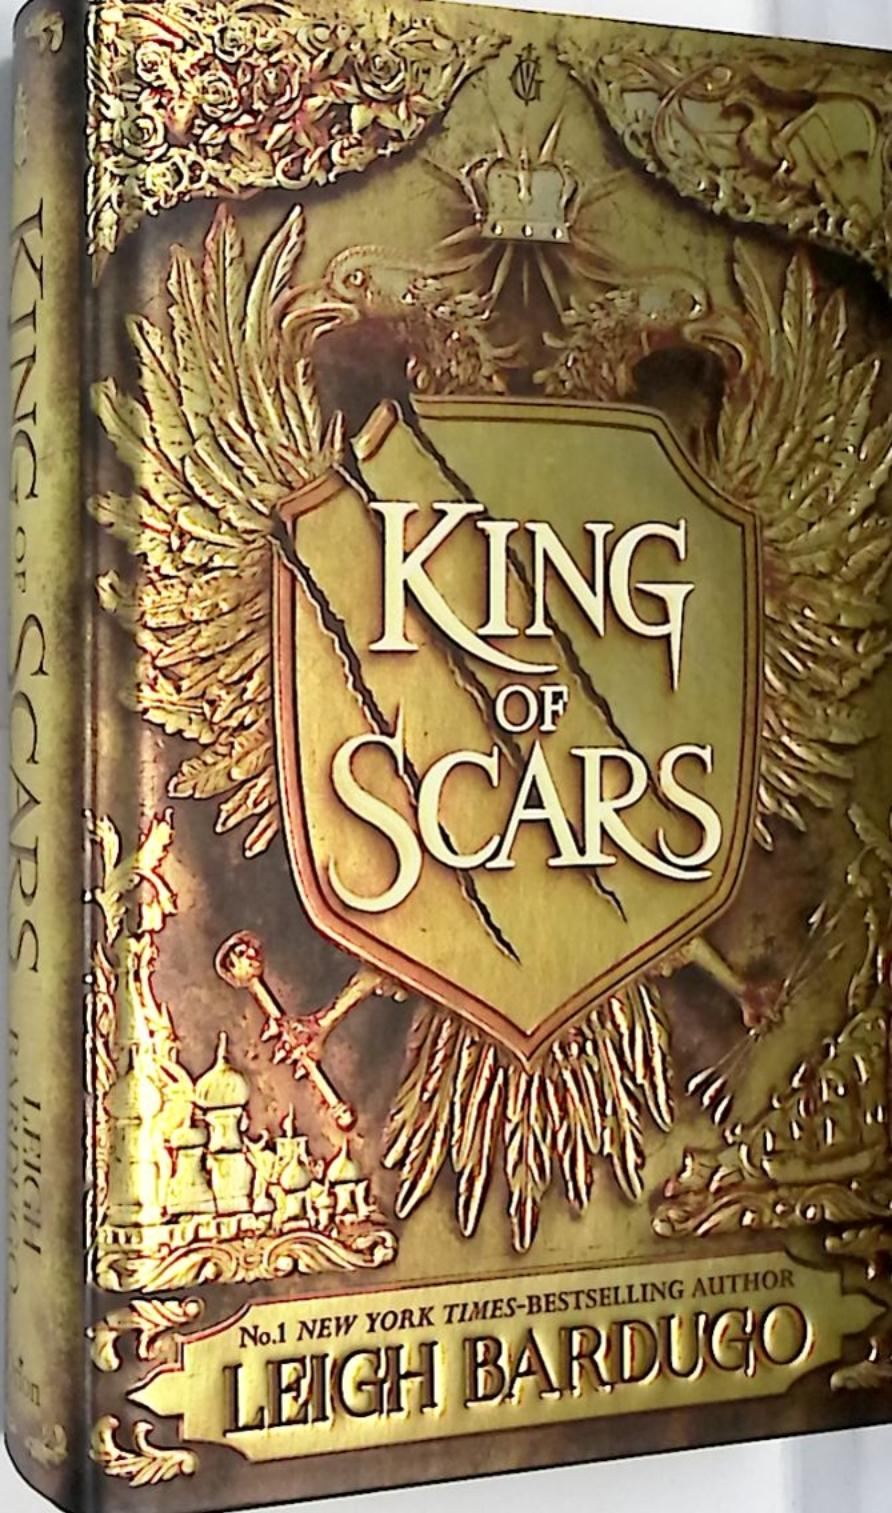 King of Scars. Limited signed edition